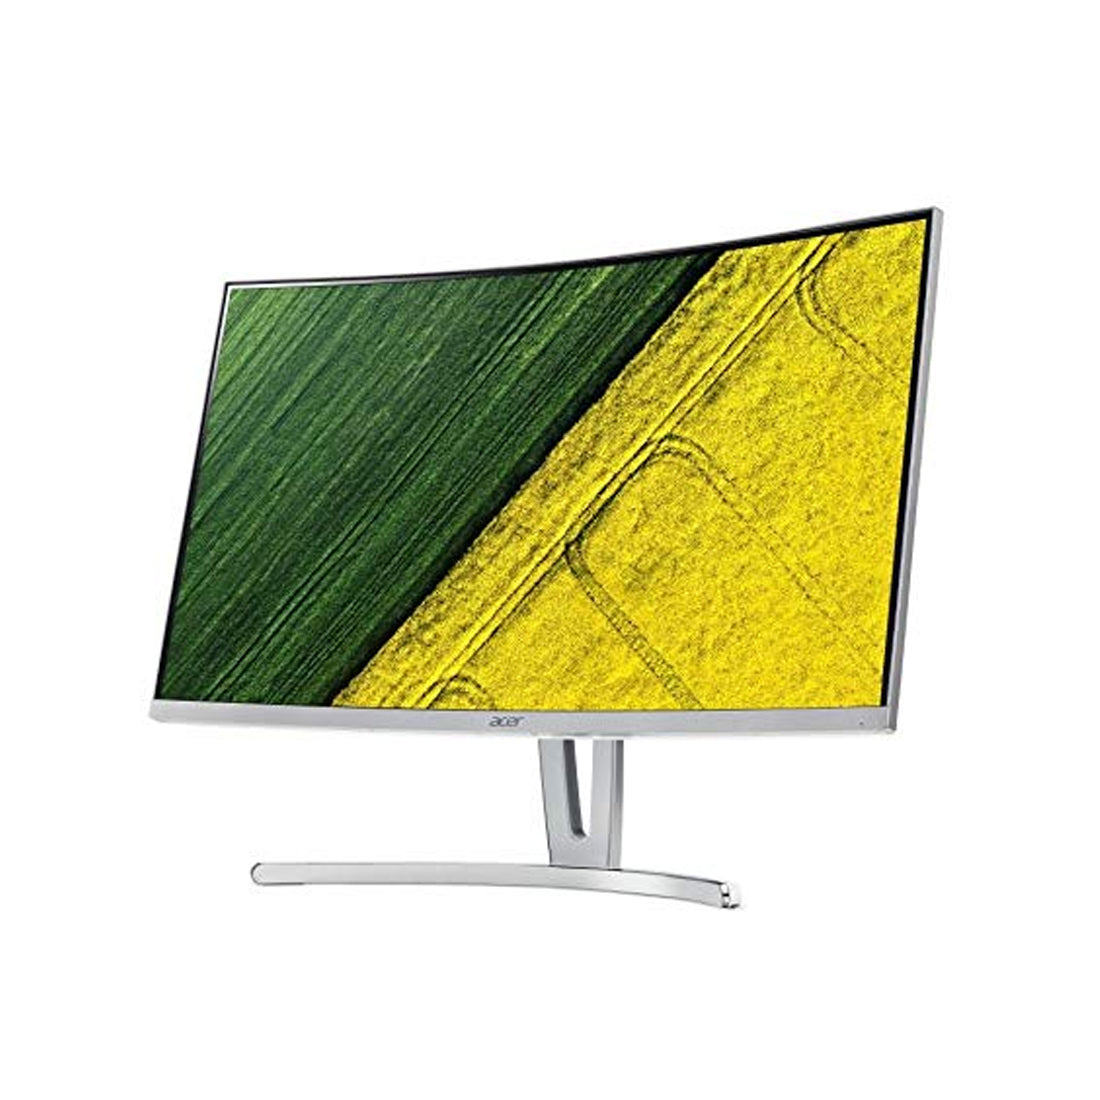 Acer ED273 27-Inch Full HD VA Panel Monitor with 75Hz Refresh Rate and Dual 3W Speakers